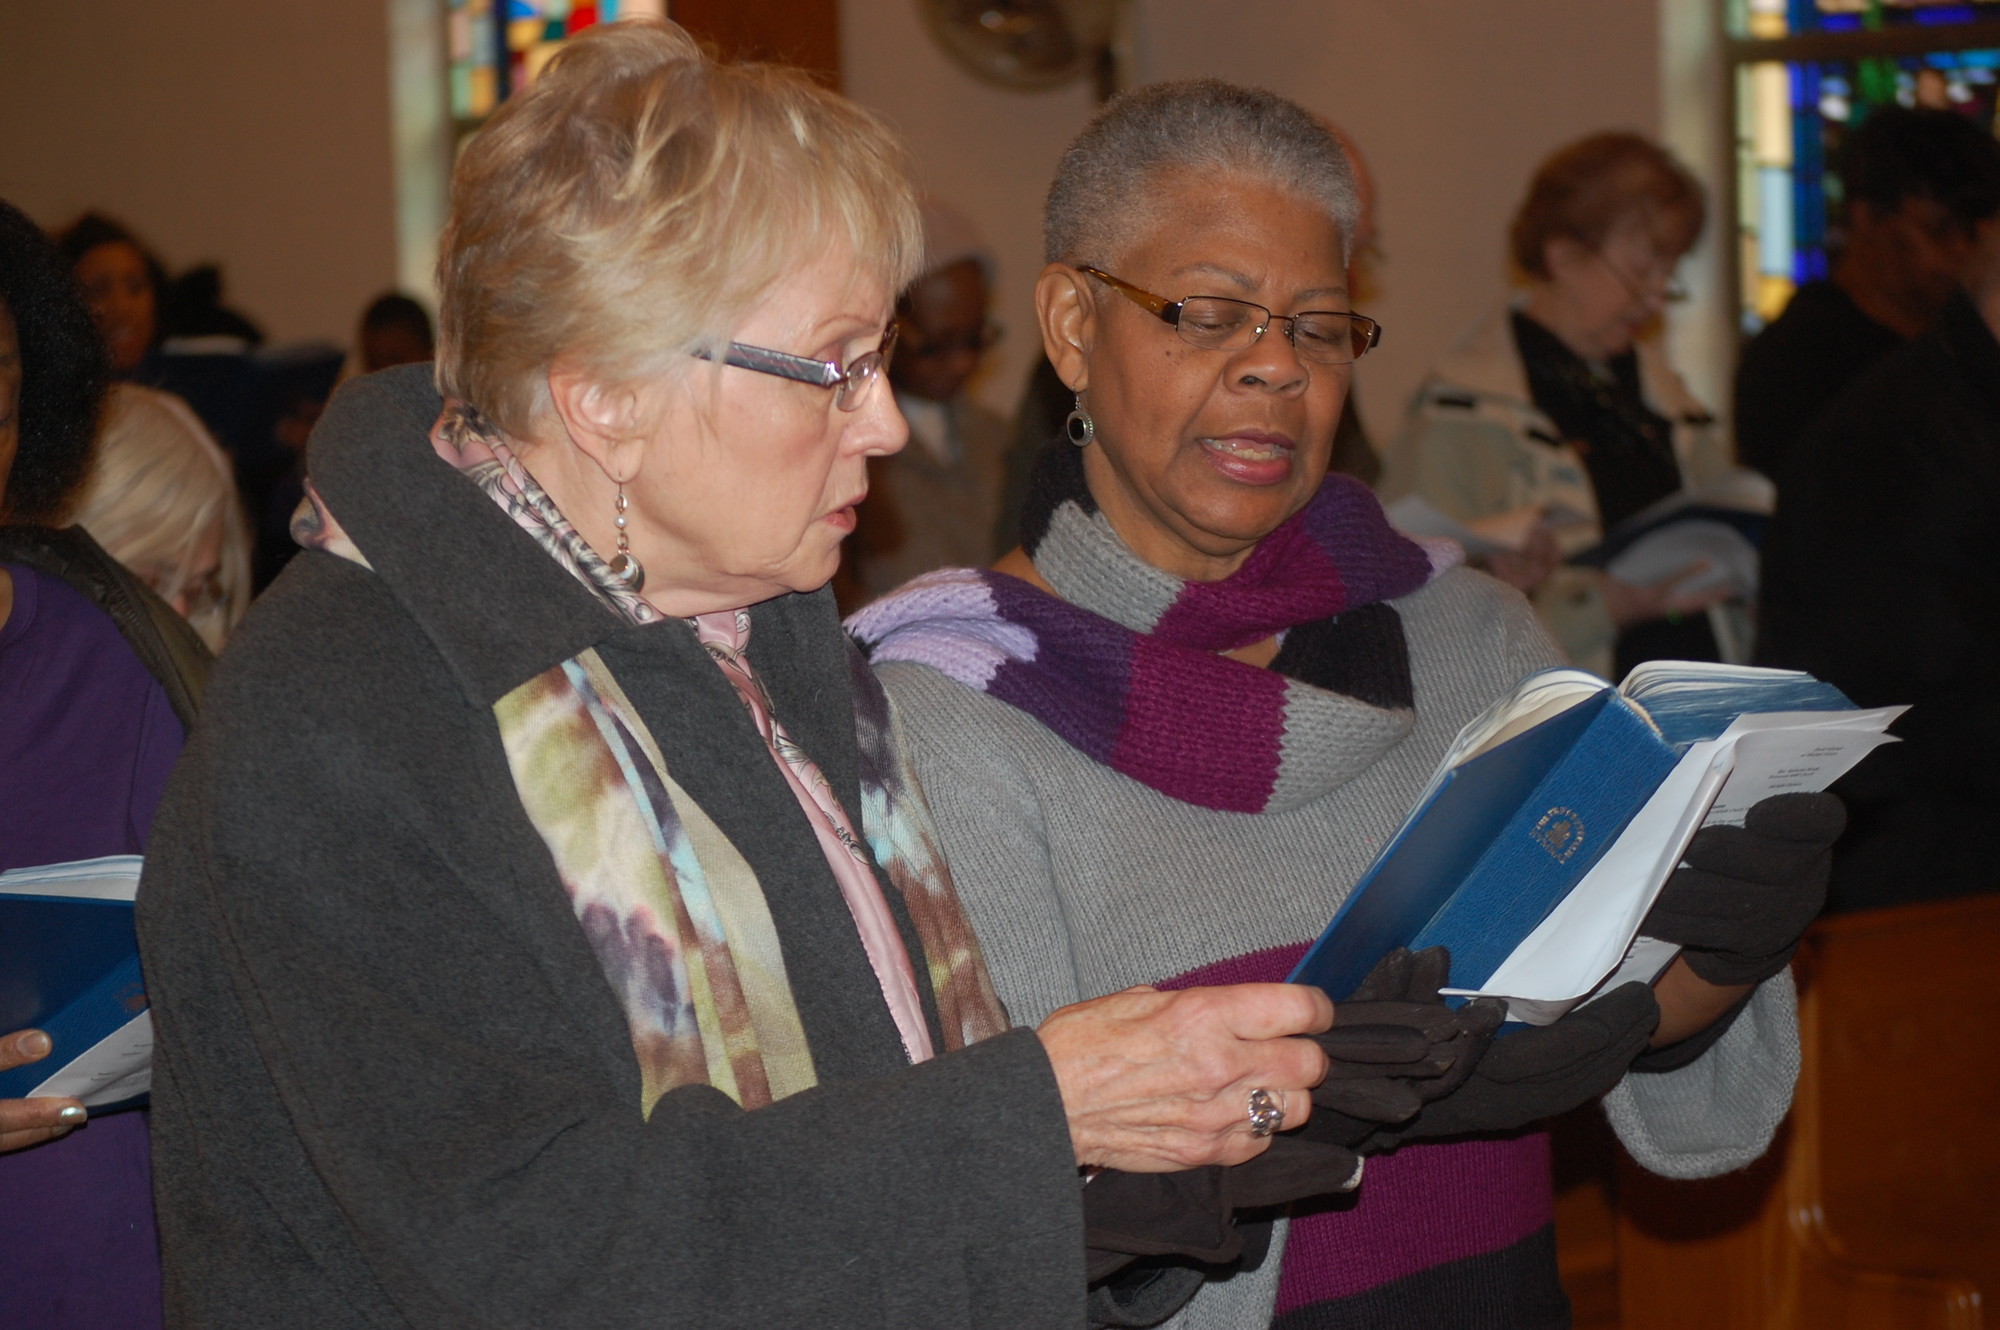 Margaret Johnsen and Mercedes Mitchell sang along at the event.